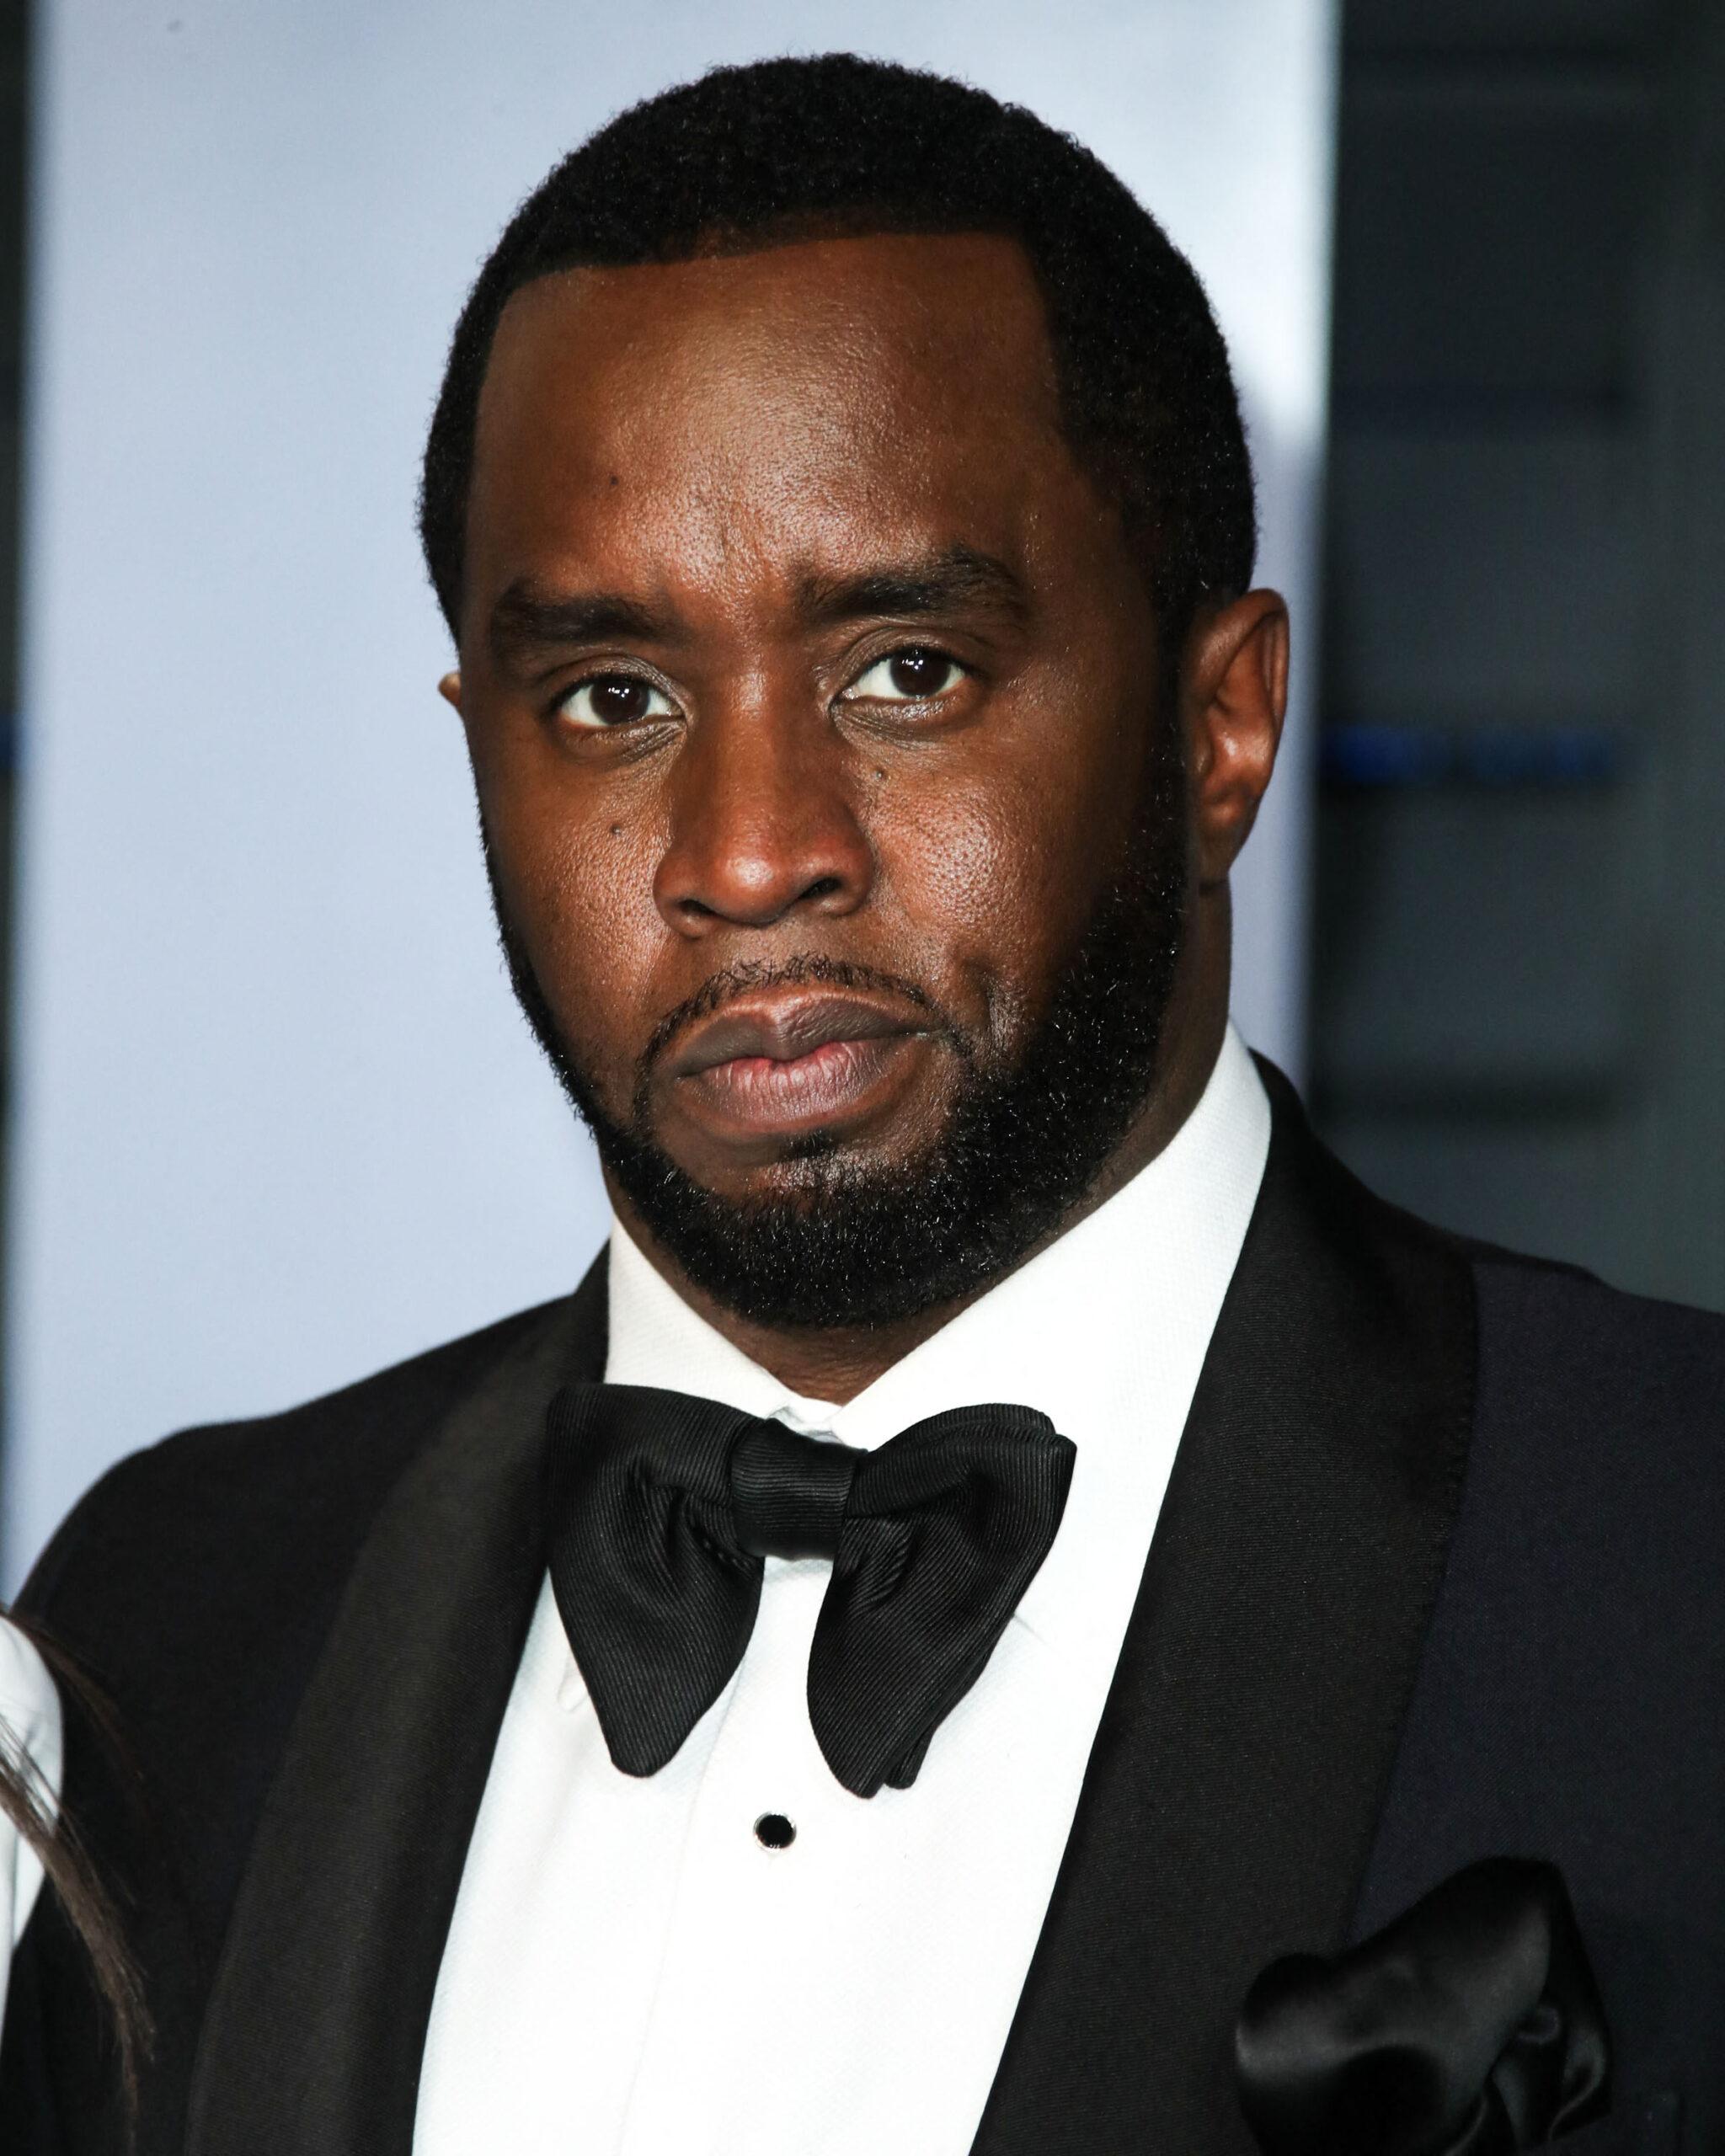 Diddy arrives at the 2018 Vanity Fair Oscar Party held at the Wallis Annenberg Center for the Performing Arts on March 4, 2018 in Beverly Hills, Los Angeles